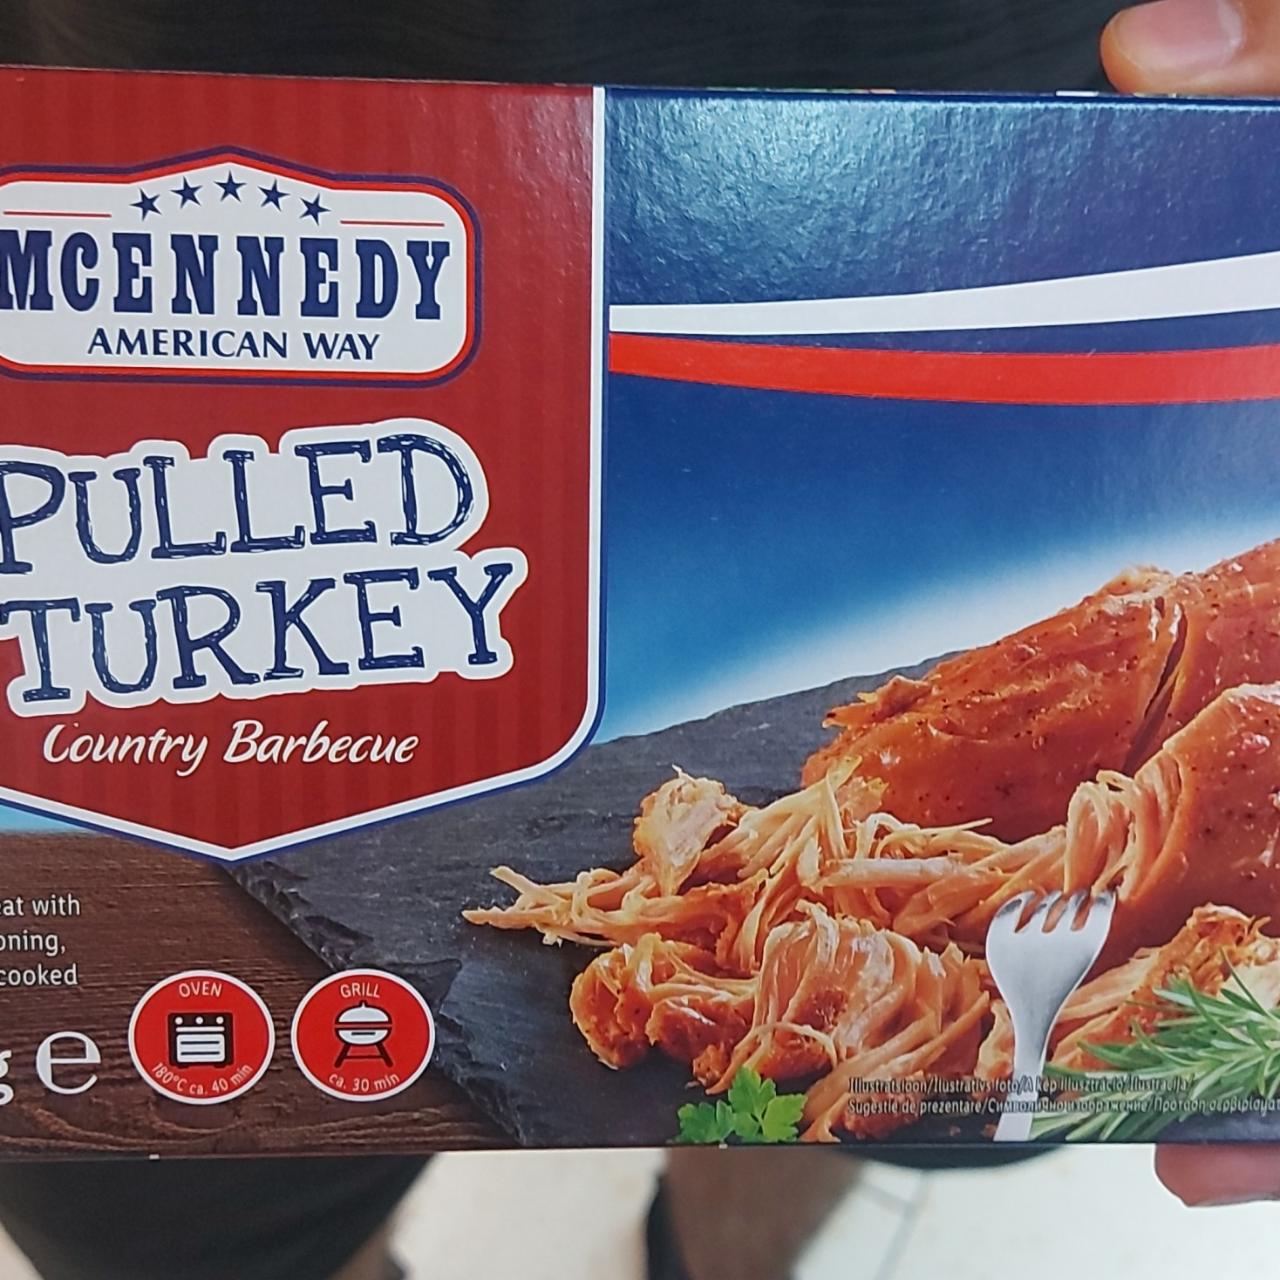 Képek - Pulled turkey Country Barbecue Mcennedy American way